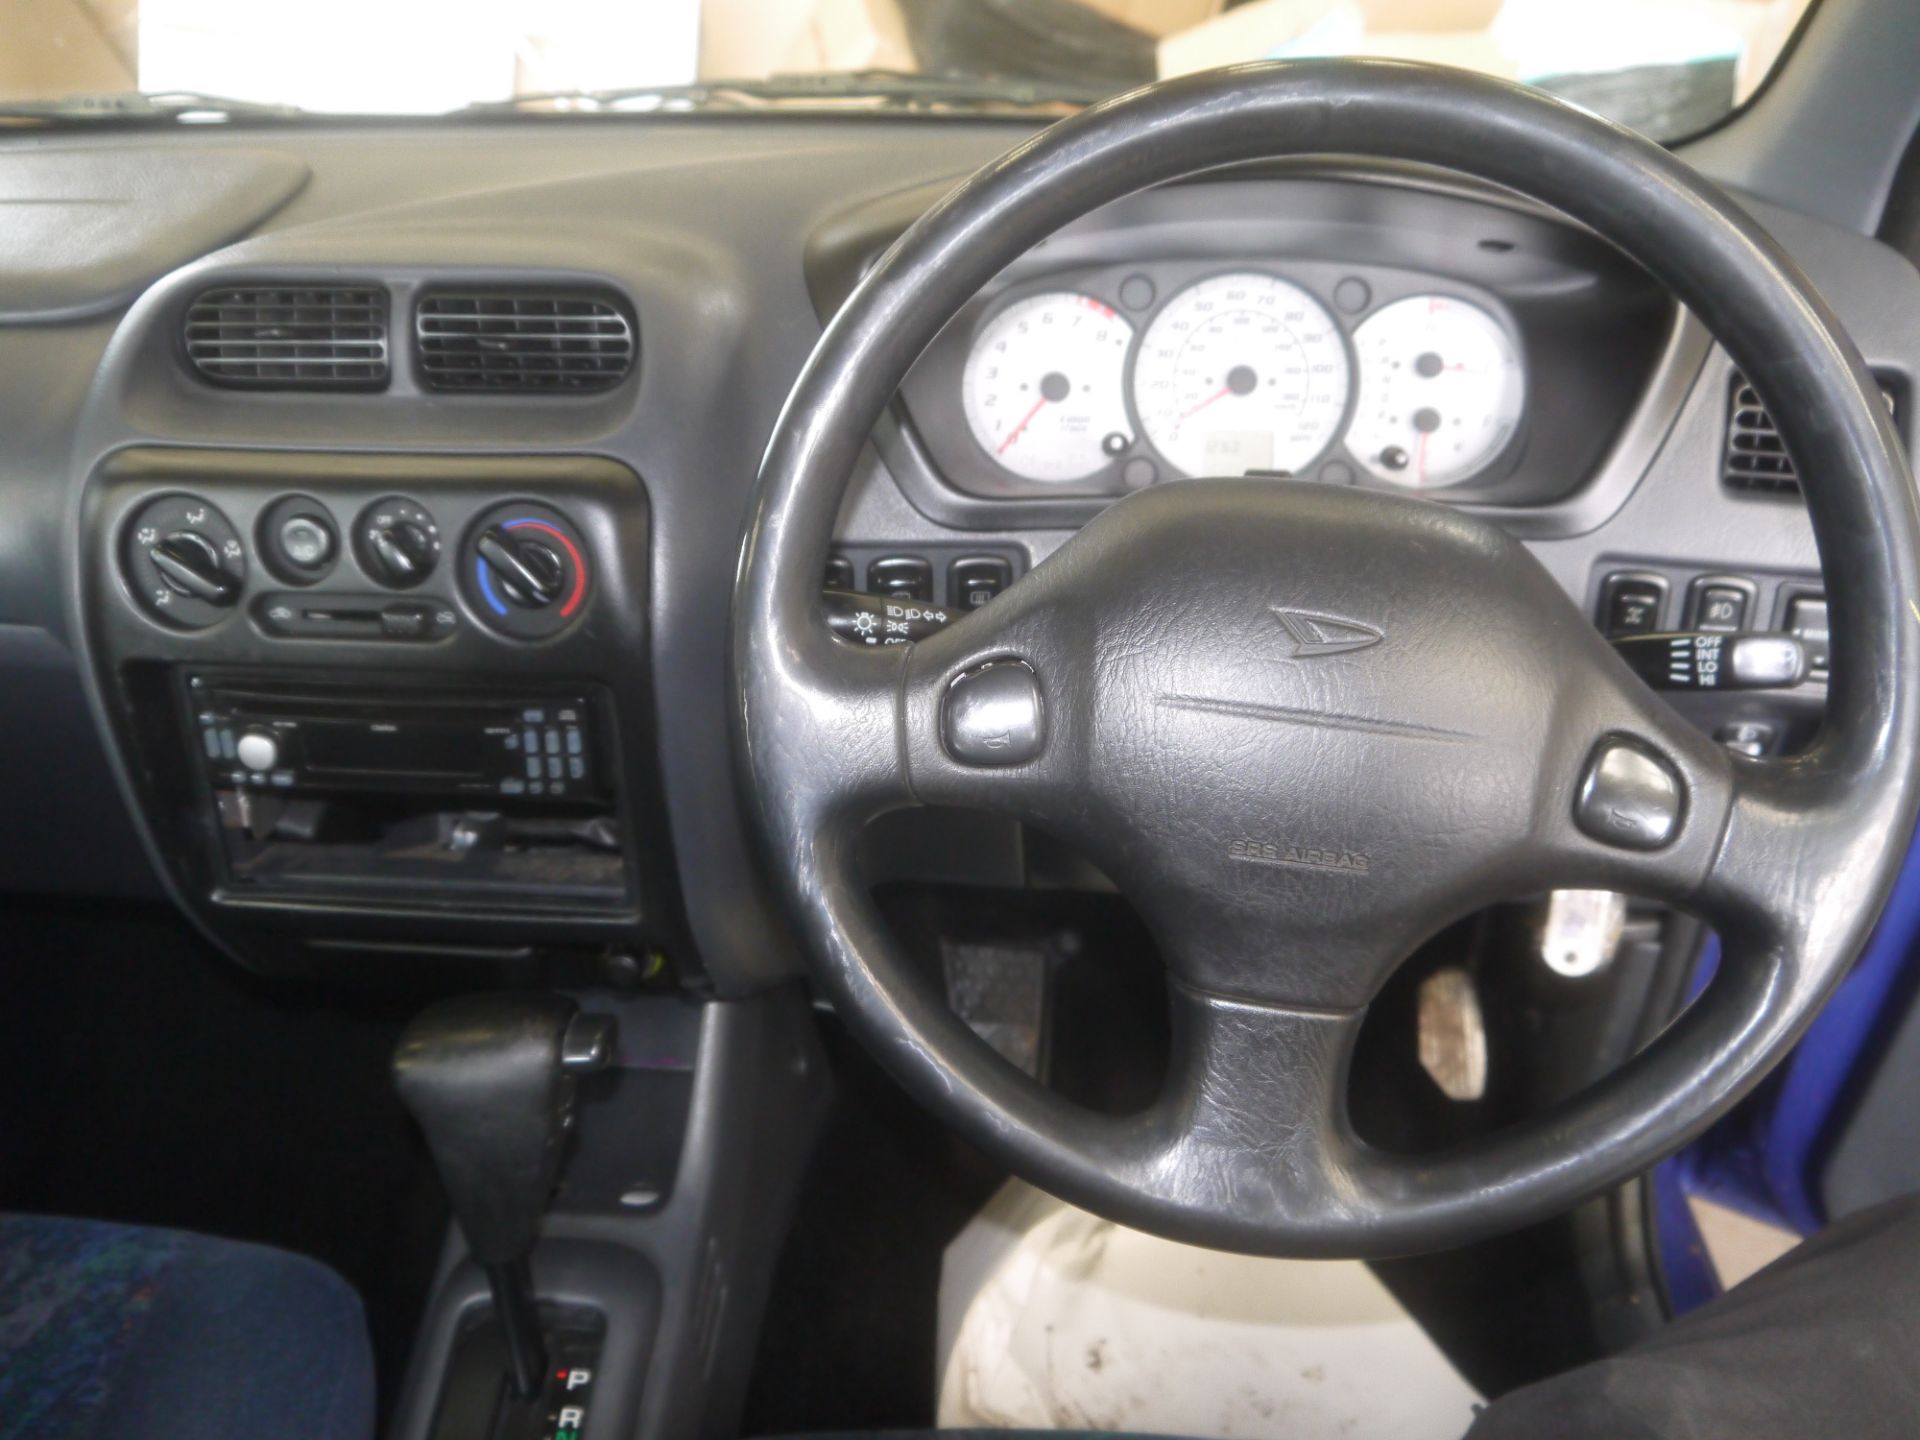 55 plate Daihatsu Terios Sport, 1.3ltr with a Automatic gearbox, 157,265 miles (unchecked), MOT - Image 9 of 10